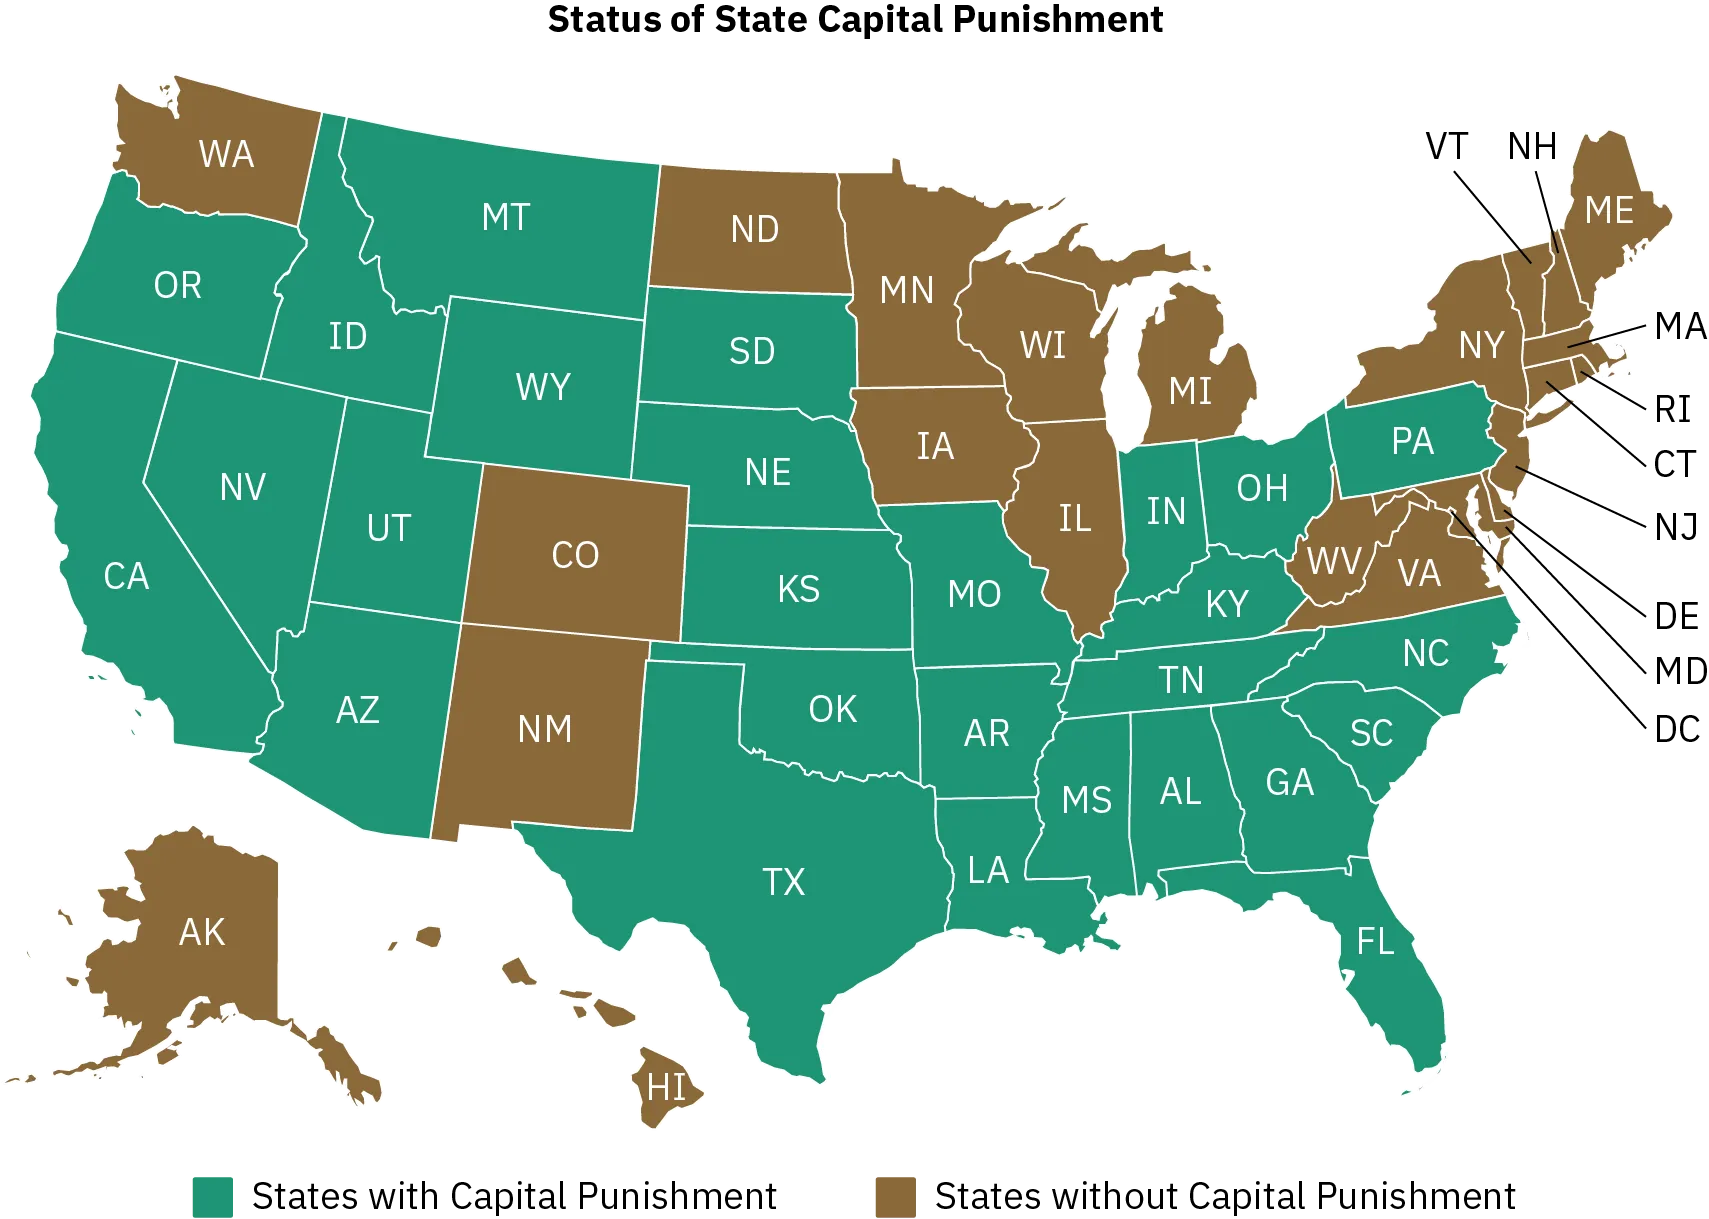 A map of the United States shows which states have capital punishment and which do not. Alaska, Connecticut, Delaware, Hawaii, Illinois, Iowa, Maine, Maryland, Massachusetts, Michigan, Minnesota, New Hampshire, New Jersey, New Mexico, New York, North Dakota, Rhode Island, Vermont, Virginia, Washington, West Virginia, and Wisconsin do not have capital punishment as of August 2021. All other states do.